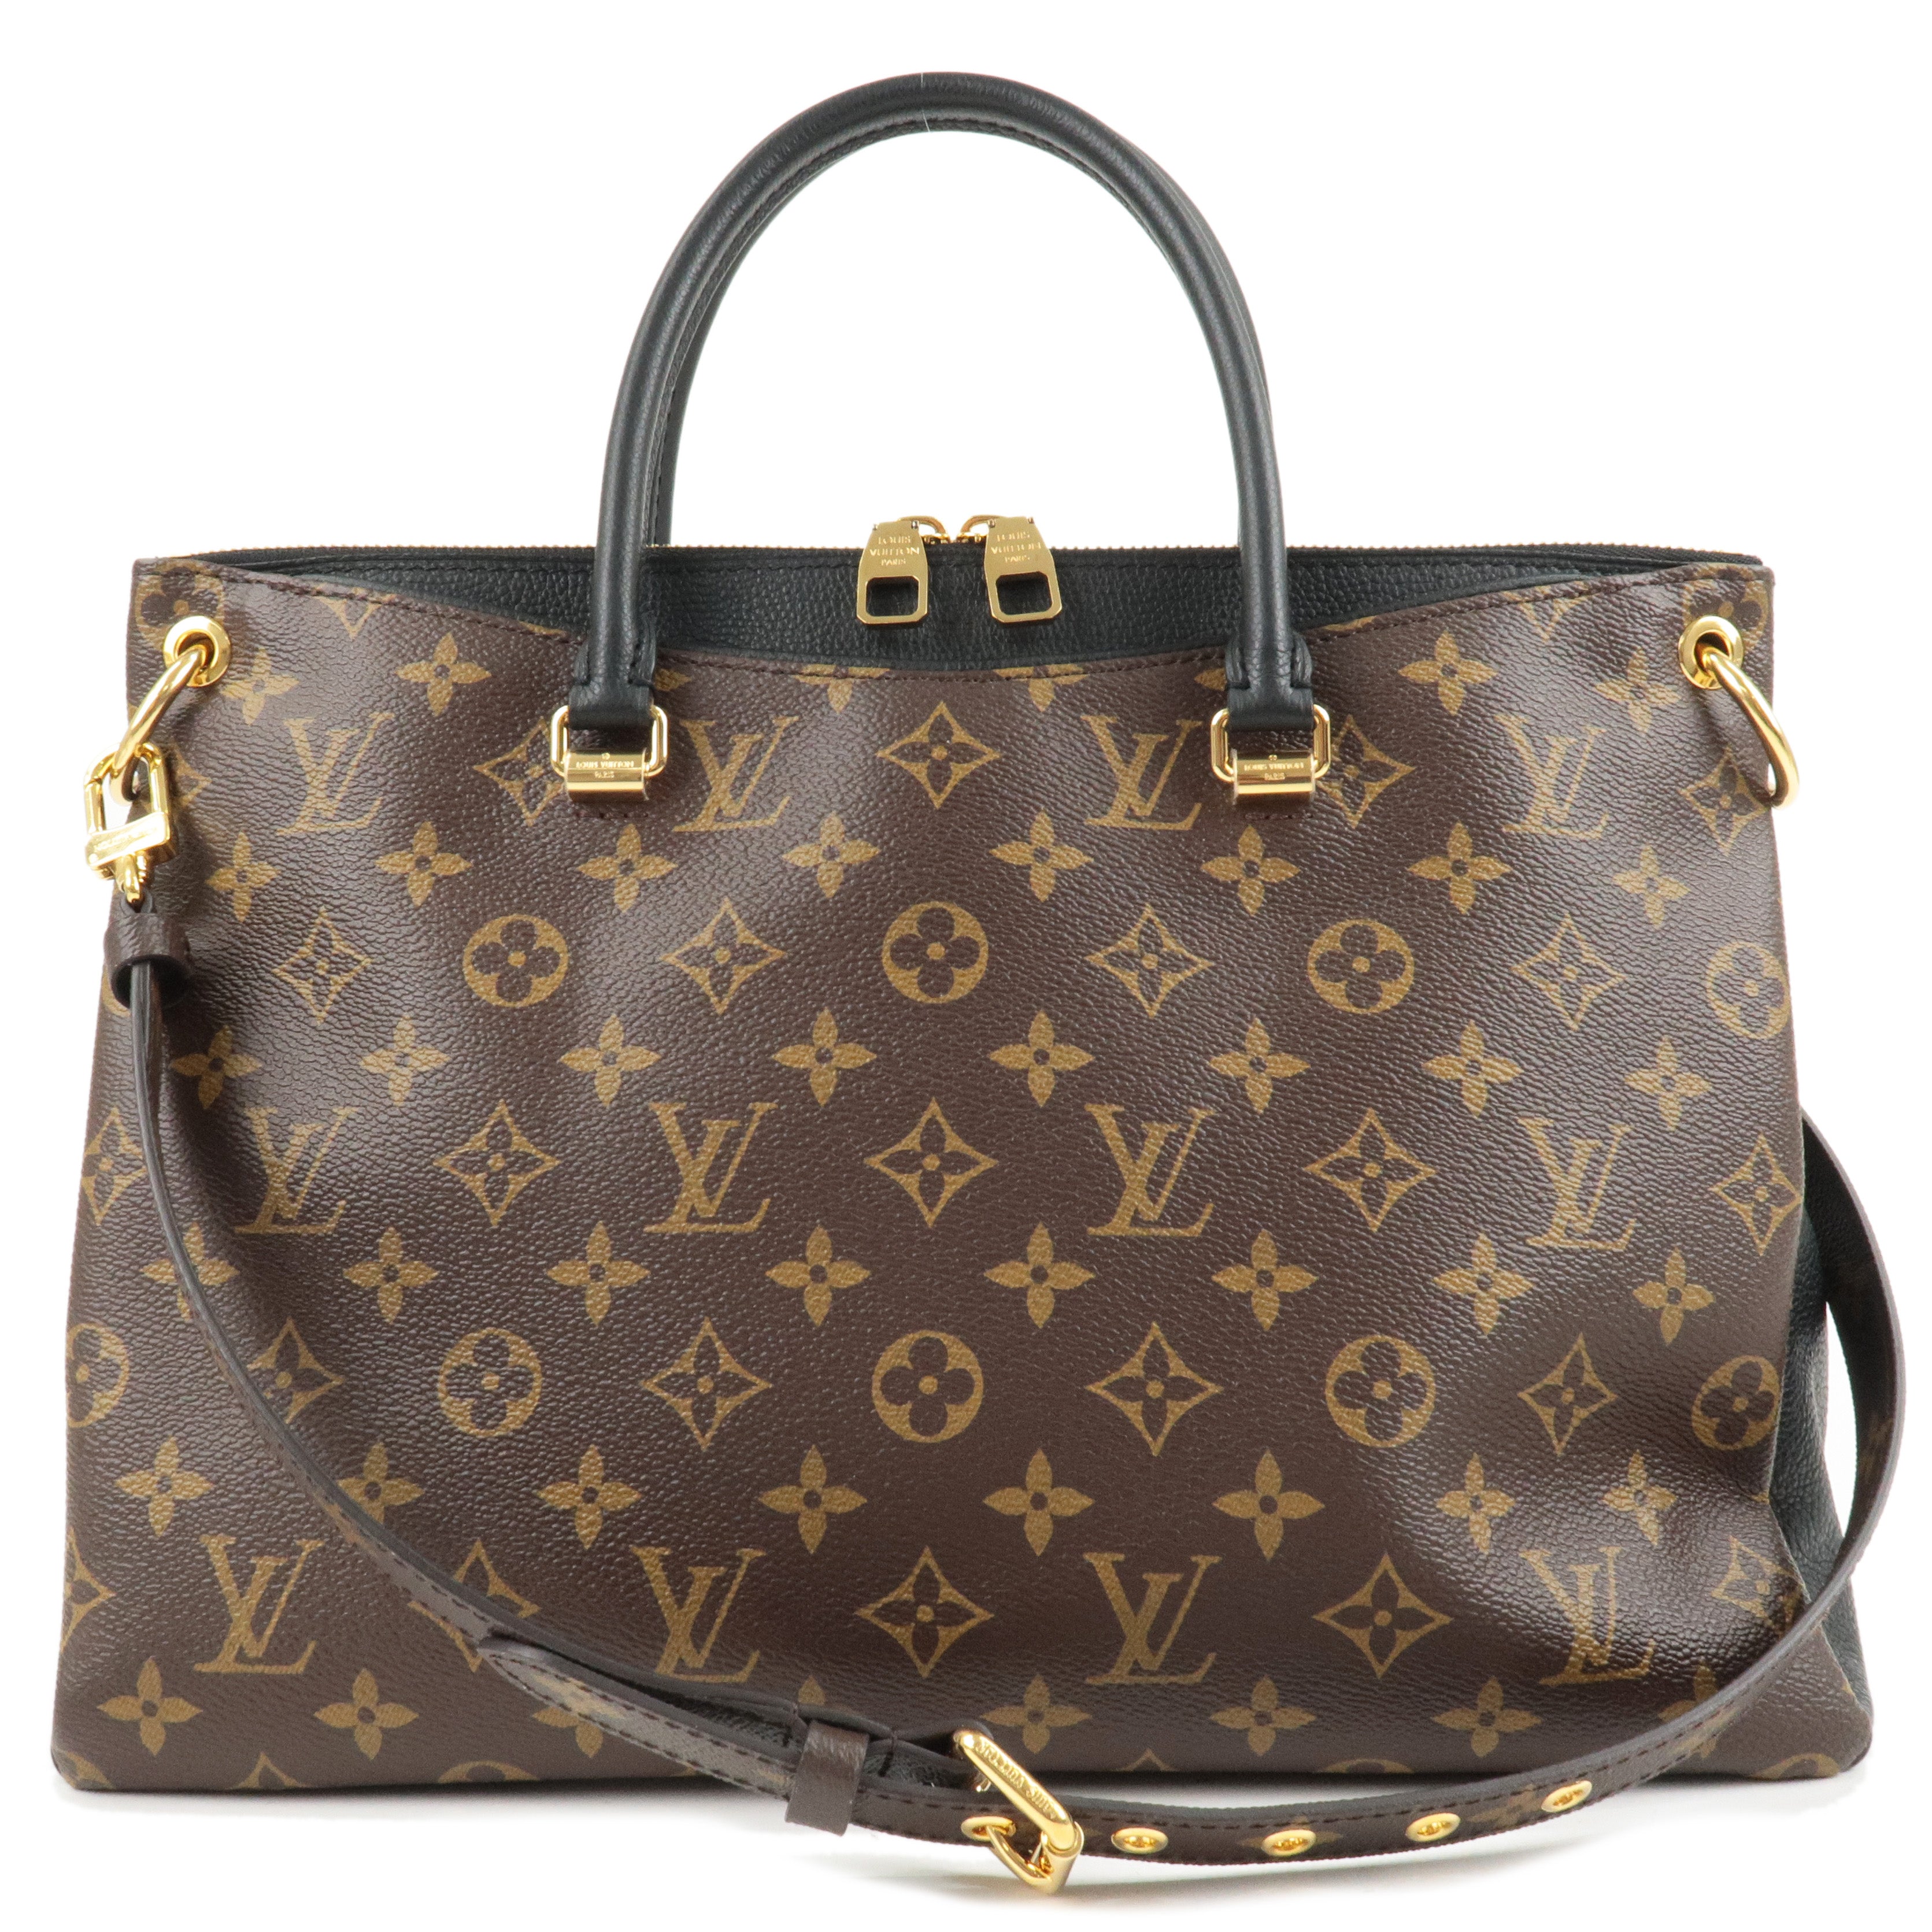 Louis Vuitton 2010 Pre-Owned Limited Edition Speedy 30 Bag - Black for Women